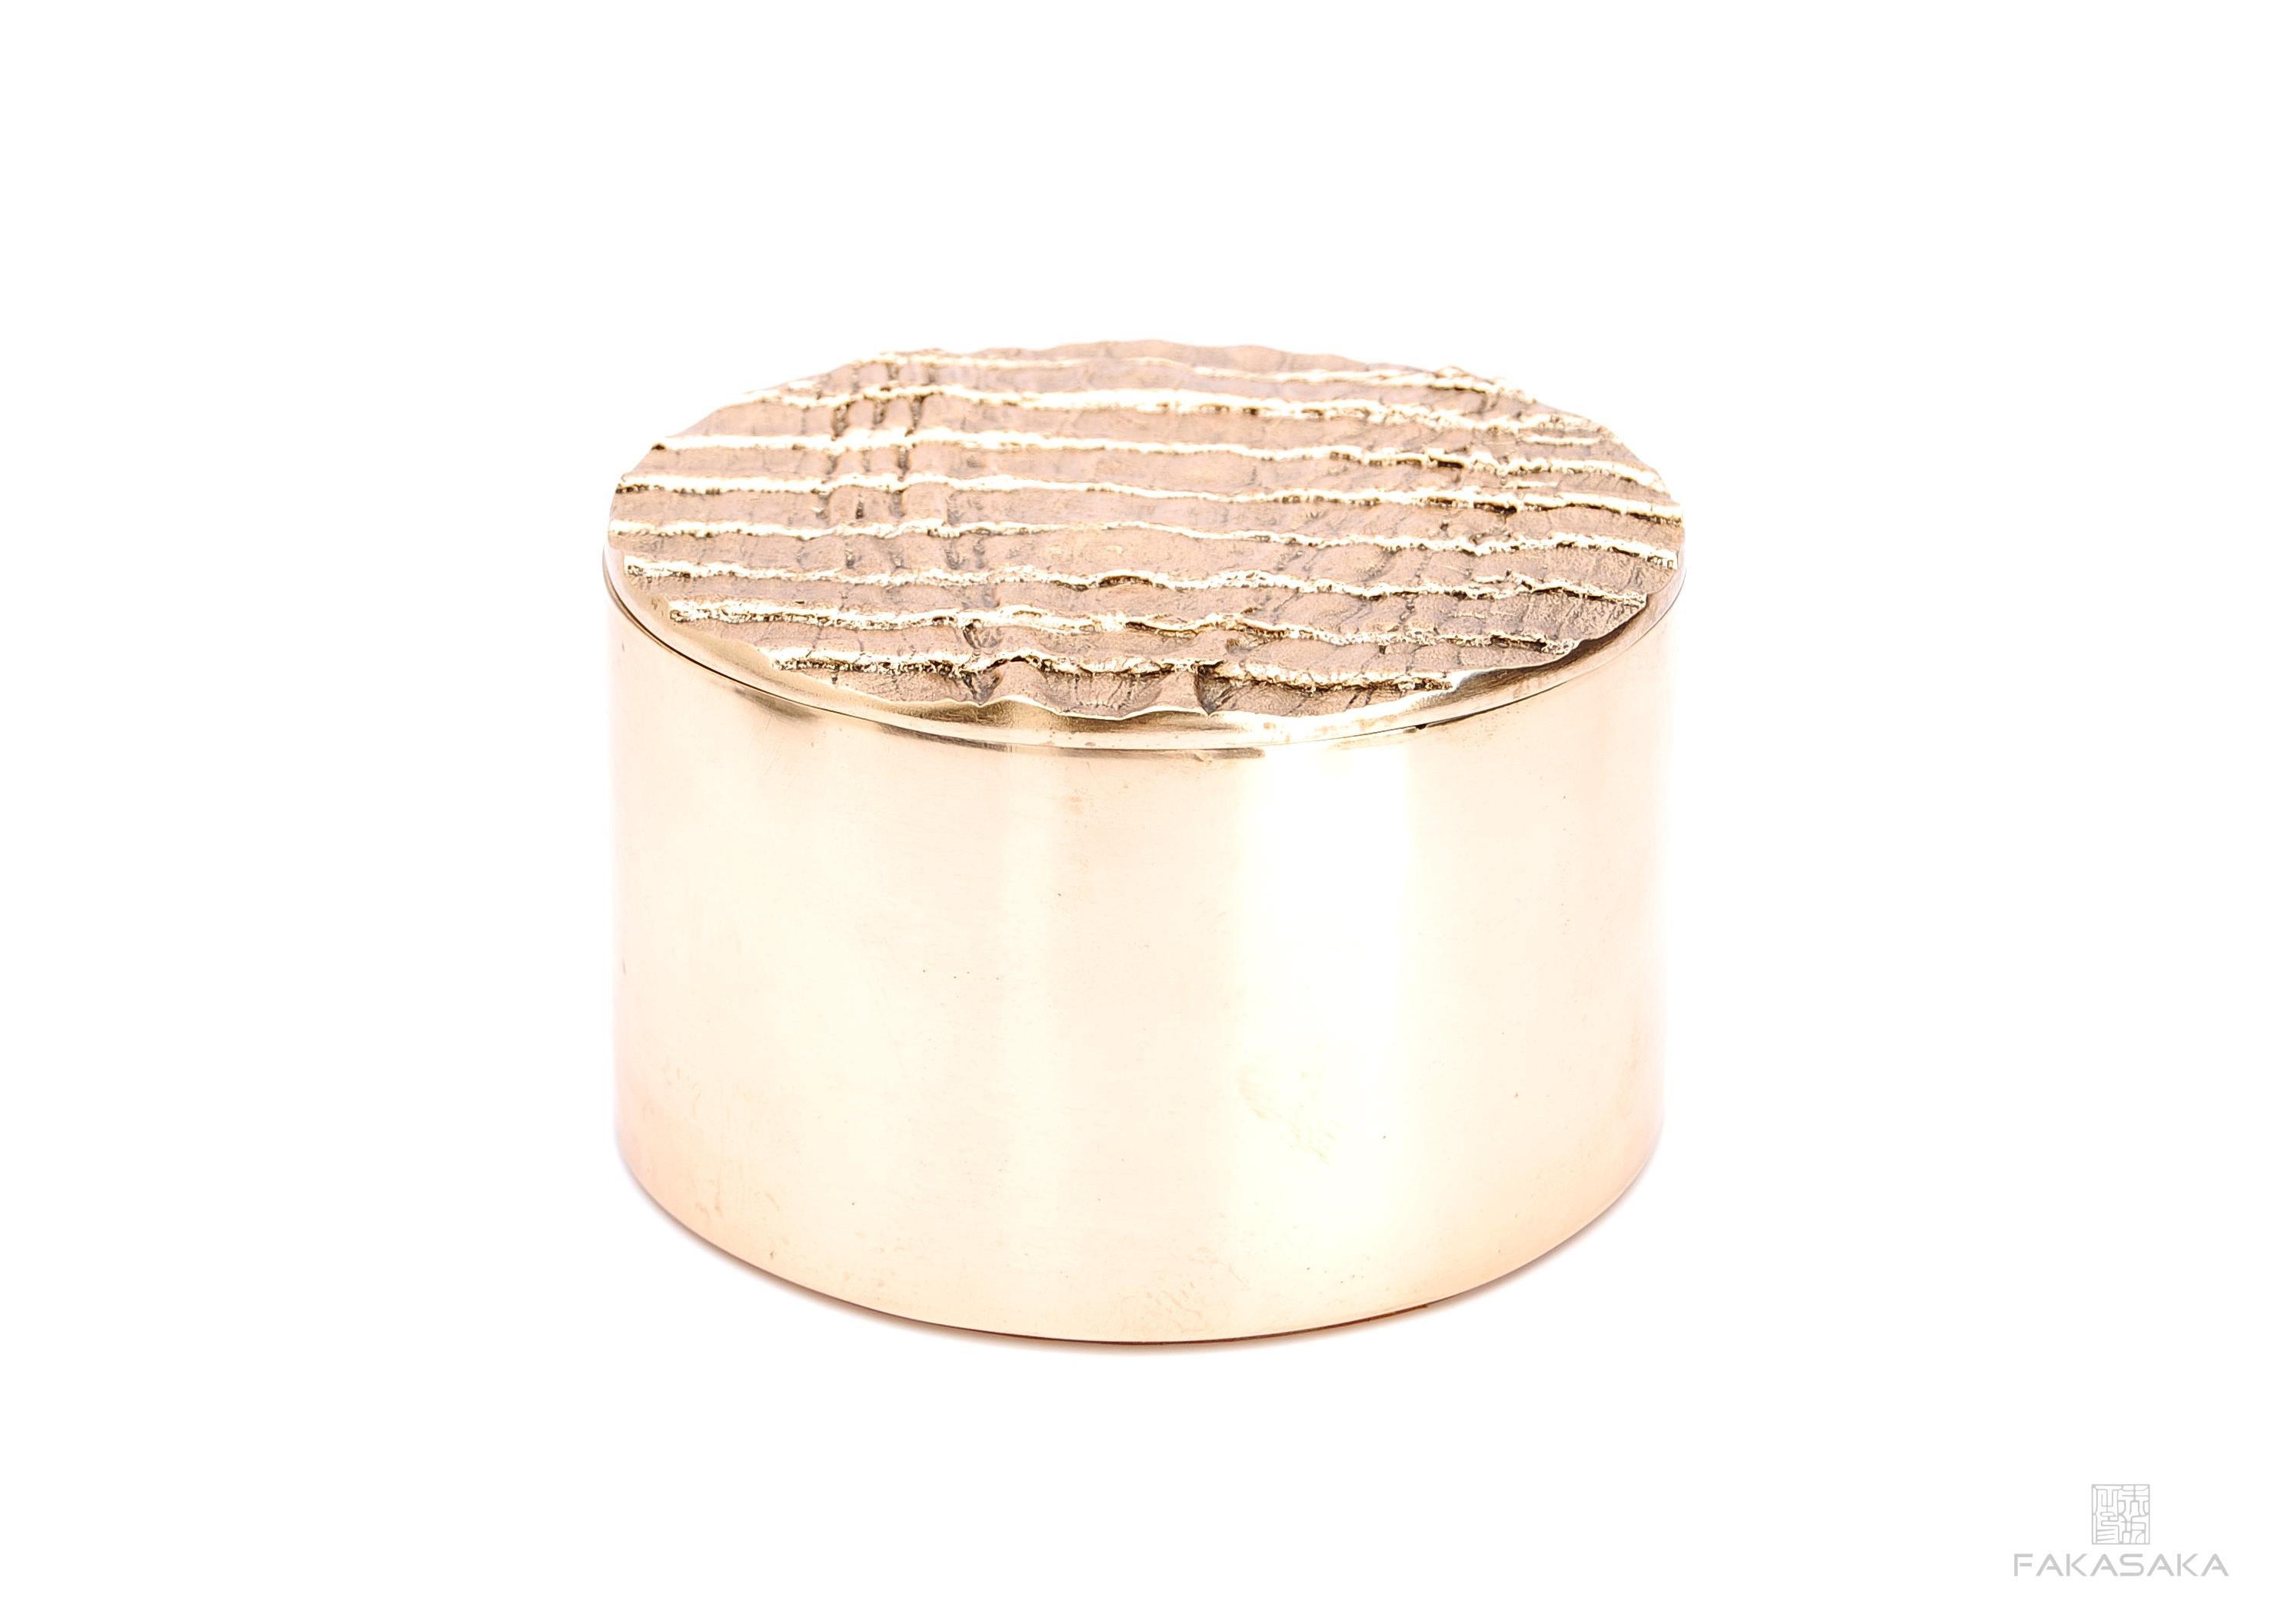 Aretha box by Fakasaka Design
Dimensions: W 15 cm D 15 cm H 9.5 cm.
Materials: polished bronze.
Also available in black/brown bronze.

 FAKASAKA is a design company focused on production of high-end furniture, lighting, decorative objects, jewels,